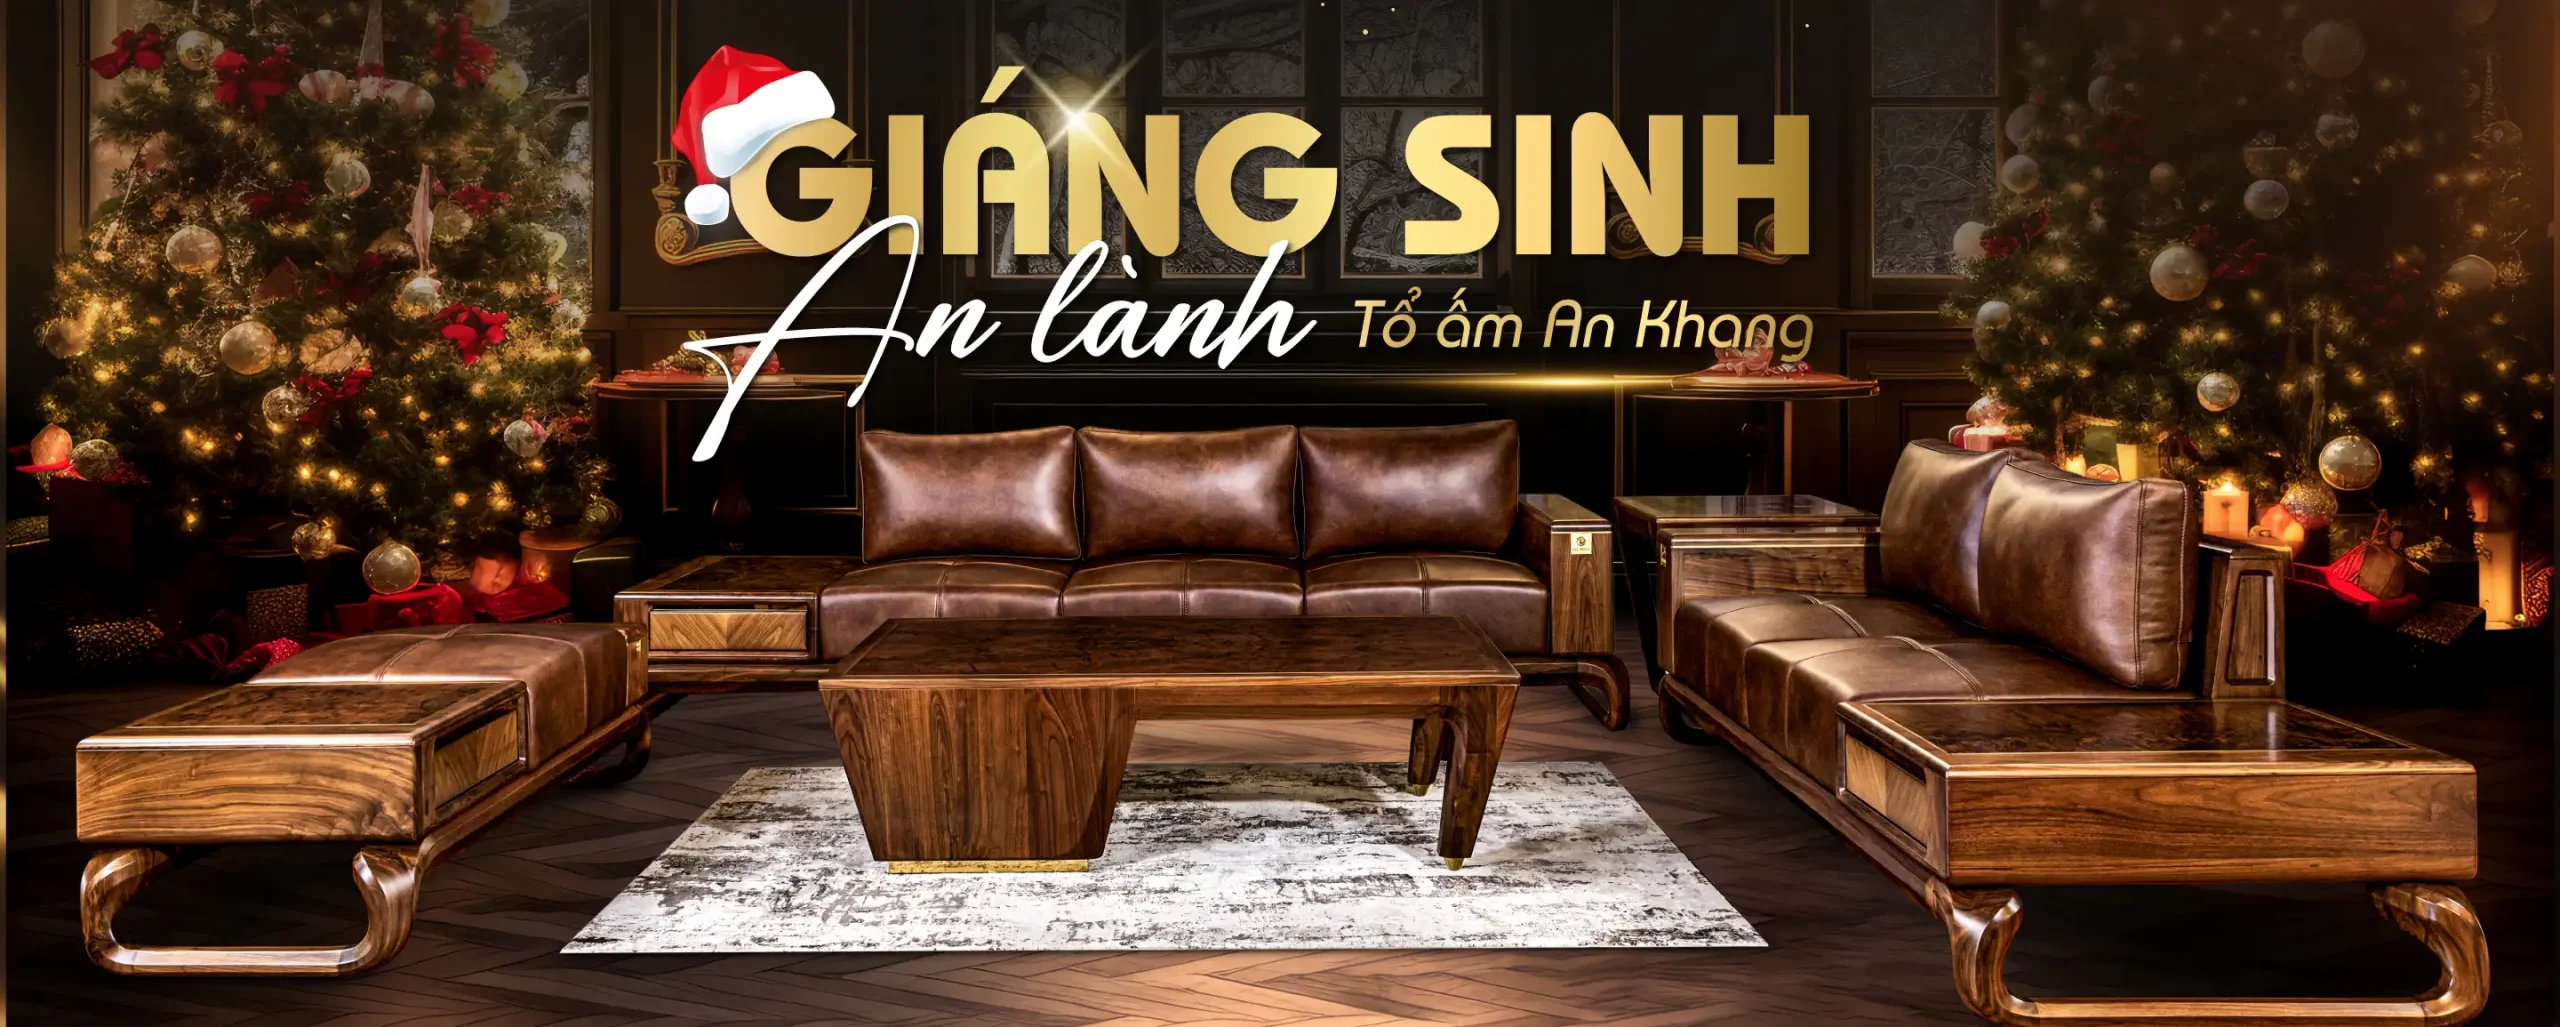 banner-ctkm-giang-sinh